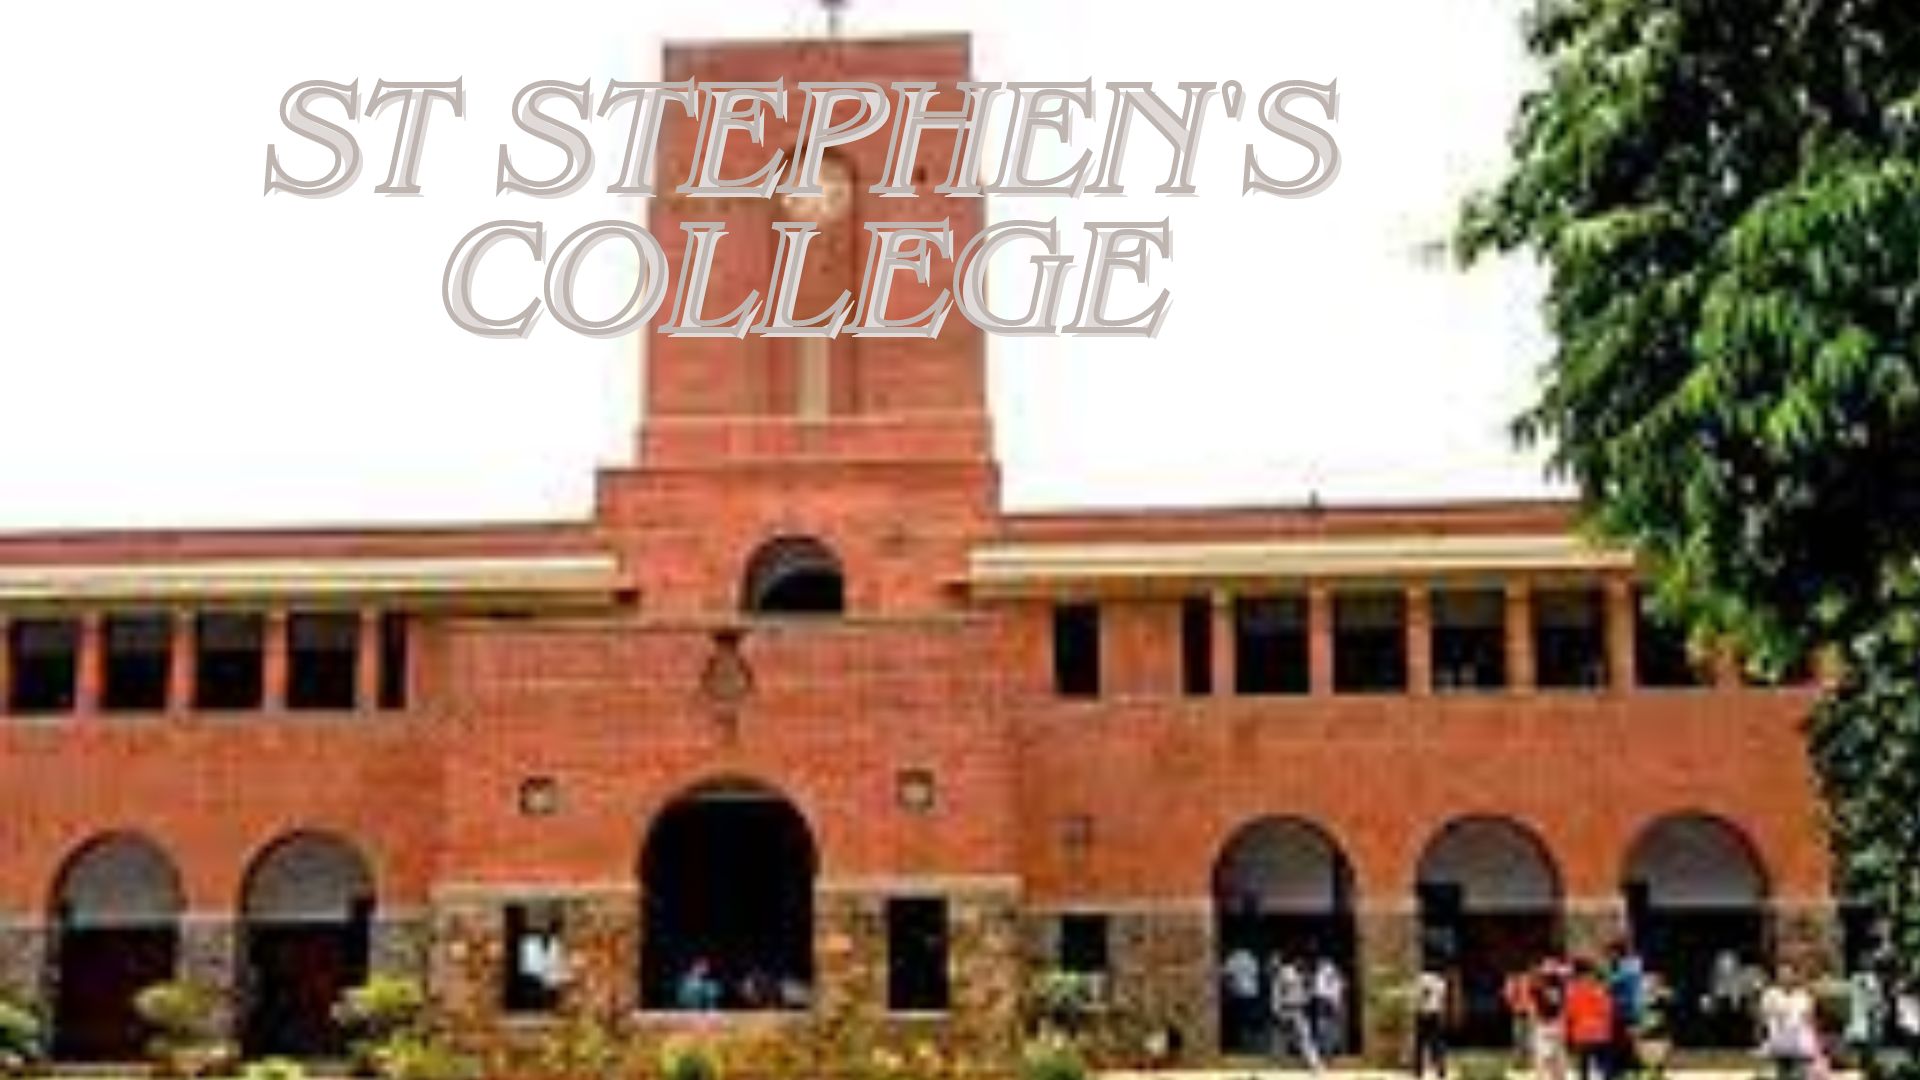 St Stephen’s college ‘suspends’ over 100 students